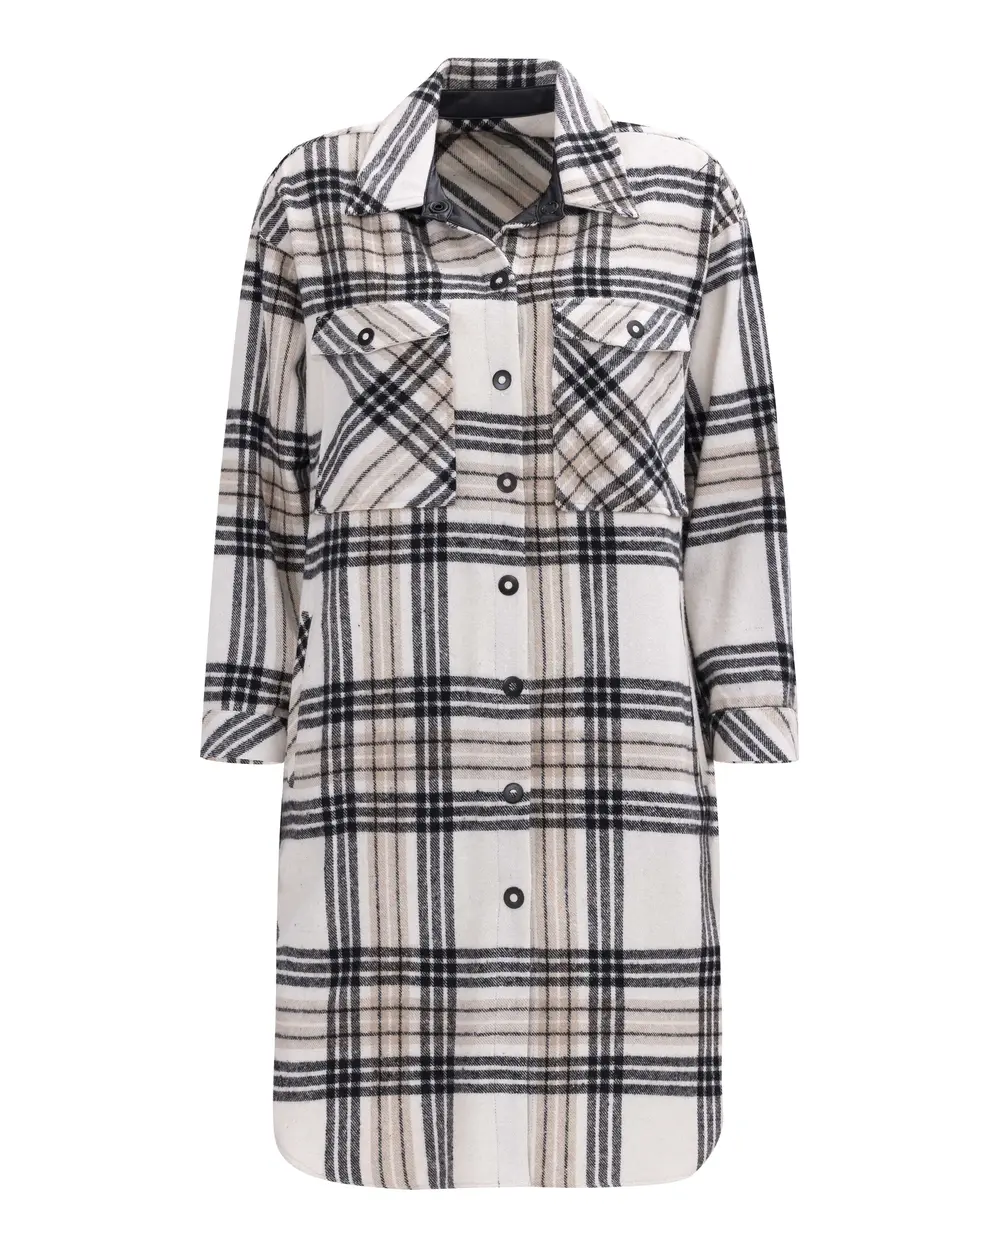 Plaid Patterned Snap Button Pocket Detailed Tunic